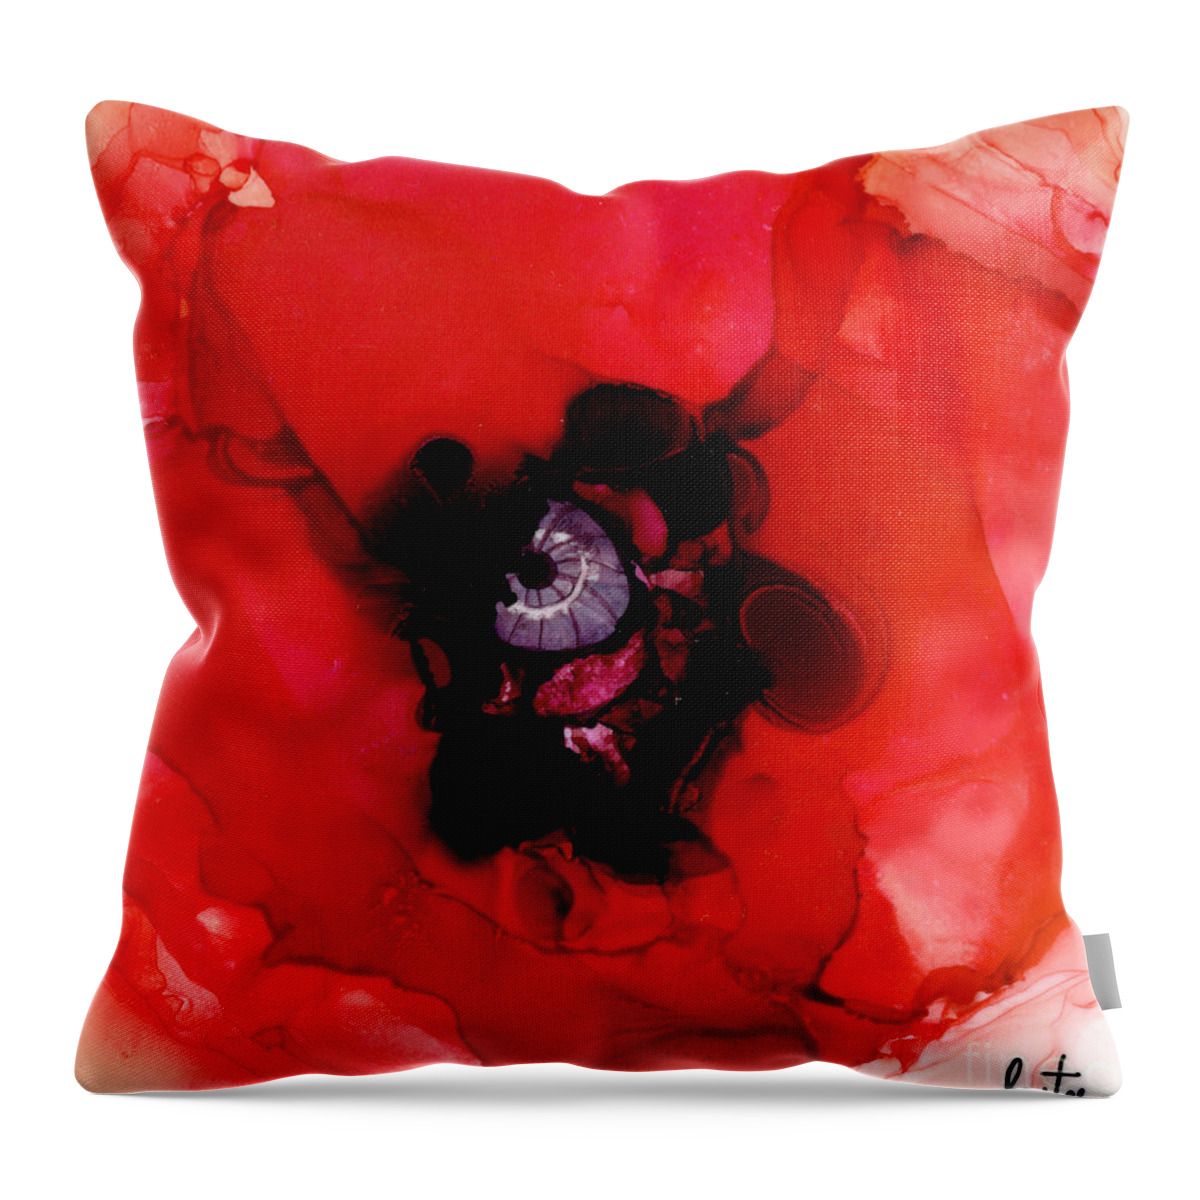 Red Poppy Throw Pillow featuring the painting Red Poppy by Daniela Easter